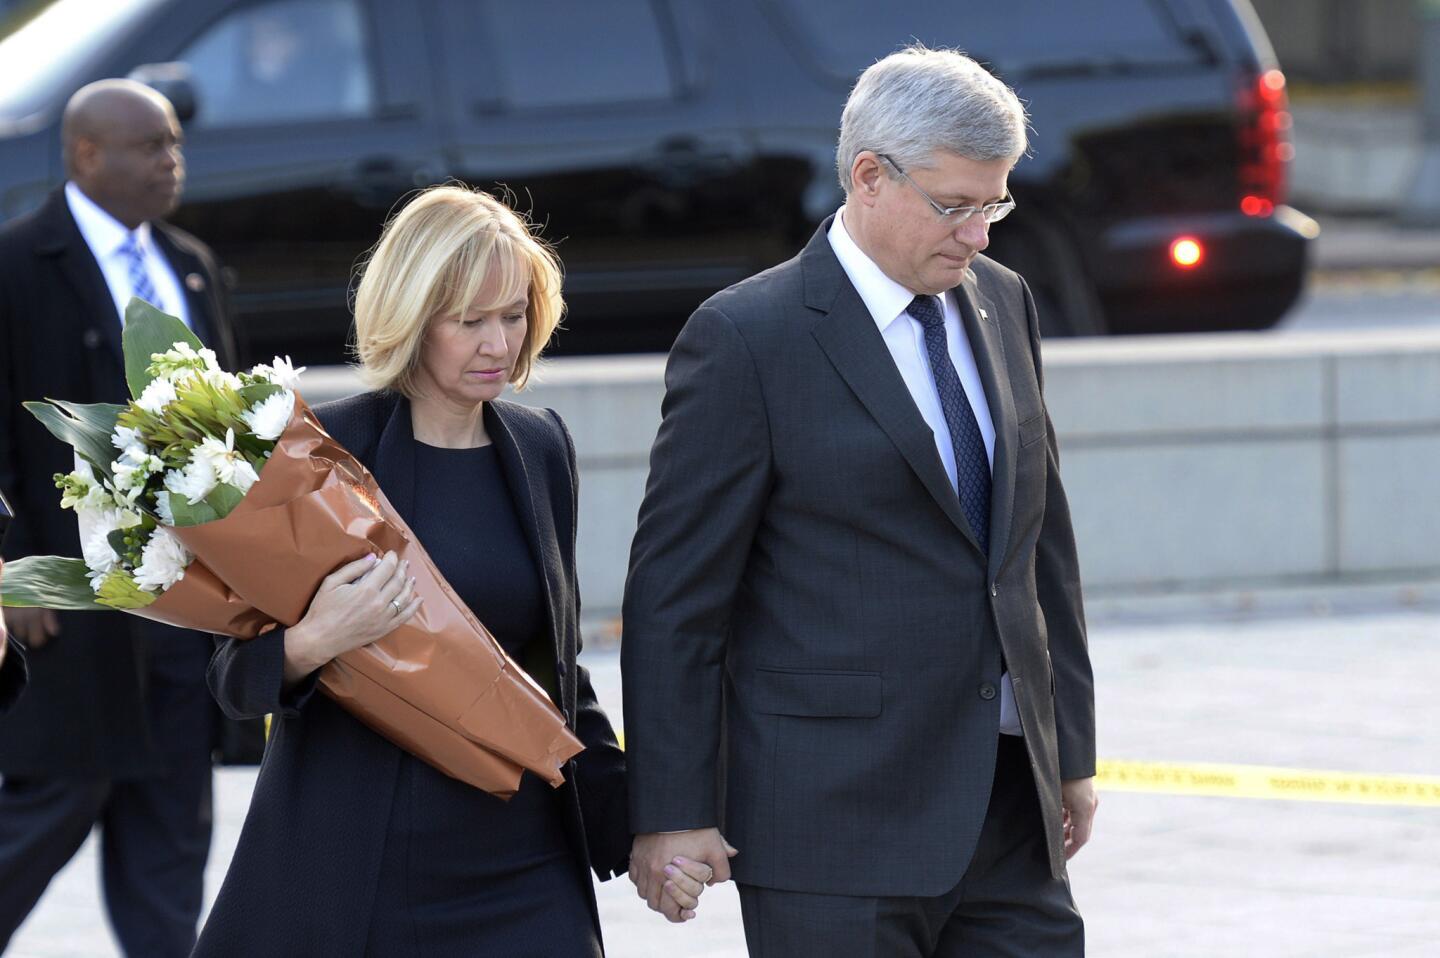 Prime Minister Stephen Harper and his wife, Laureen, visit Canada's Tomb of the Unknown Soldier in Ottawa on Oct. 23, the day after Cpl. Nathan Cirillo was killed by a gunman.